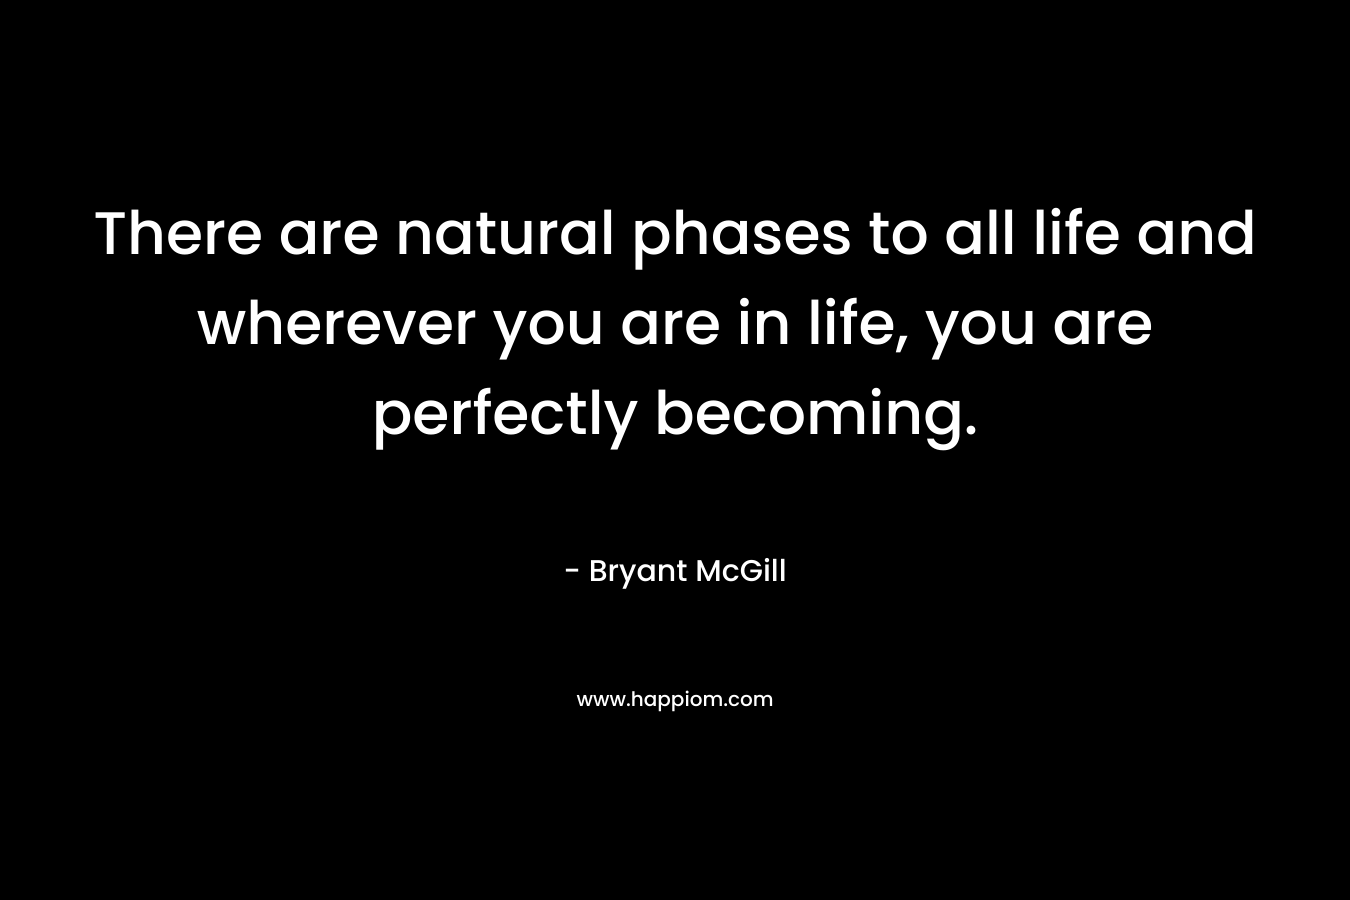 There are natural phases to all life and wherever you are in life, you are perfectly becoming. – Bryant McGill